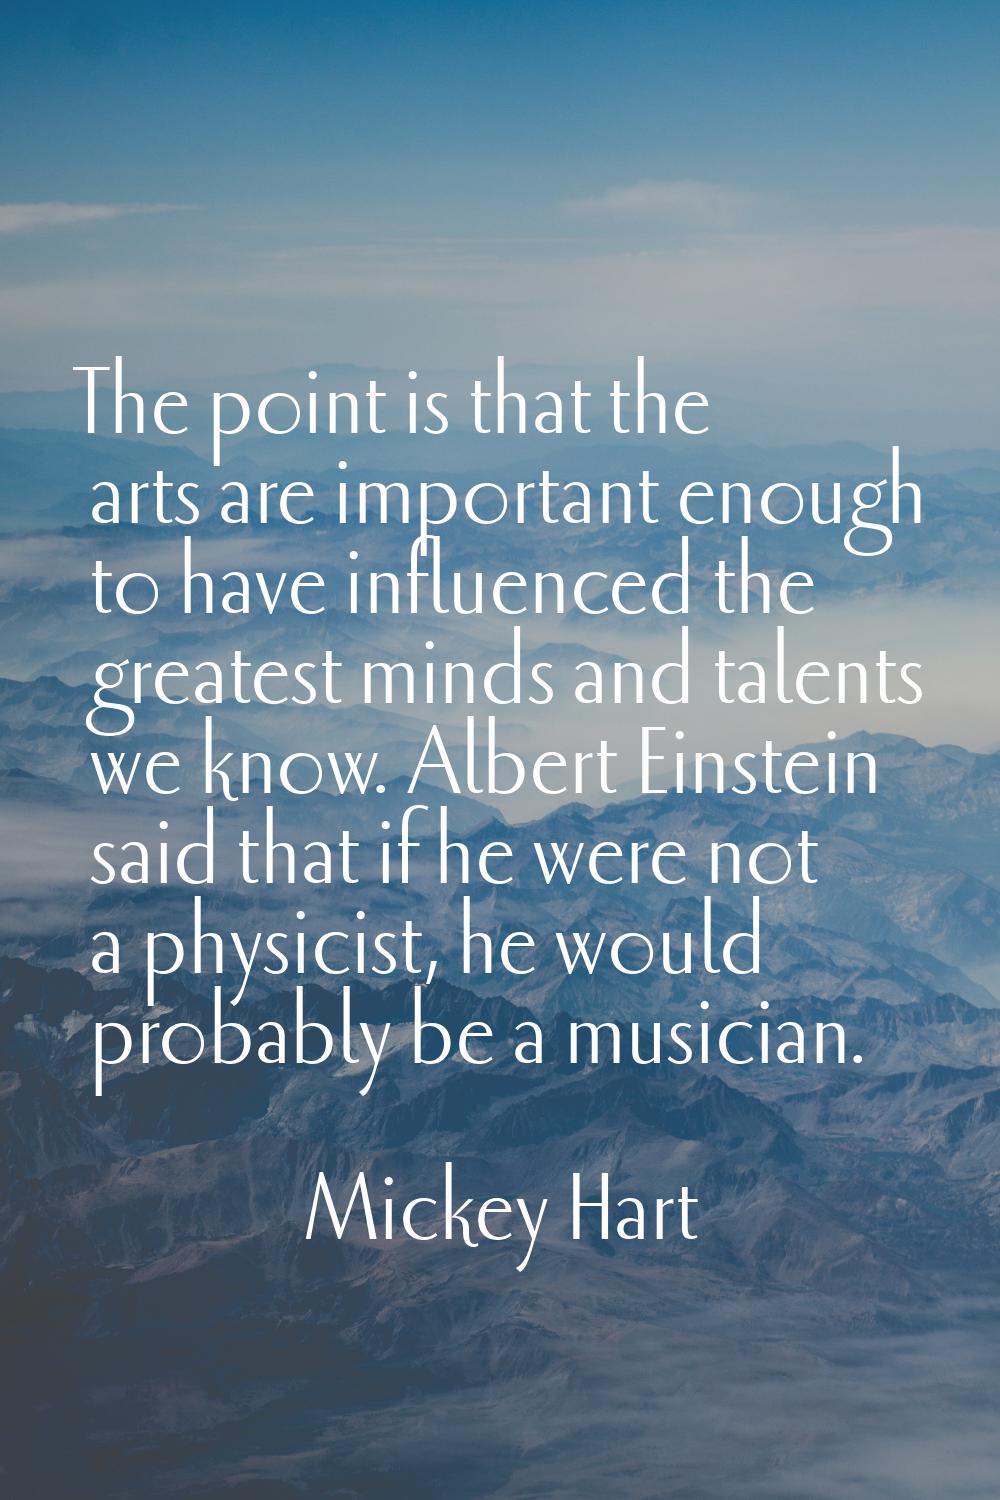 The point is that the arts are important enough to have influenced the greatest minds and talents w